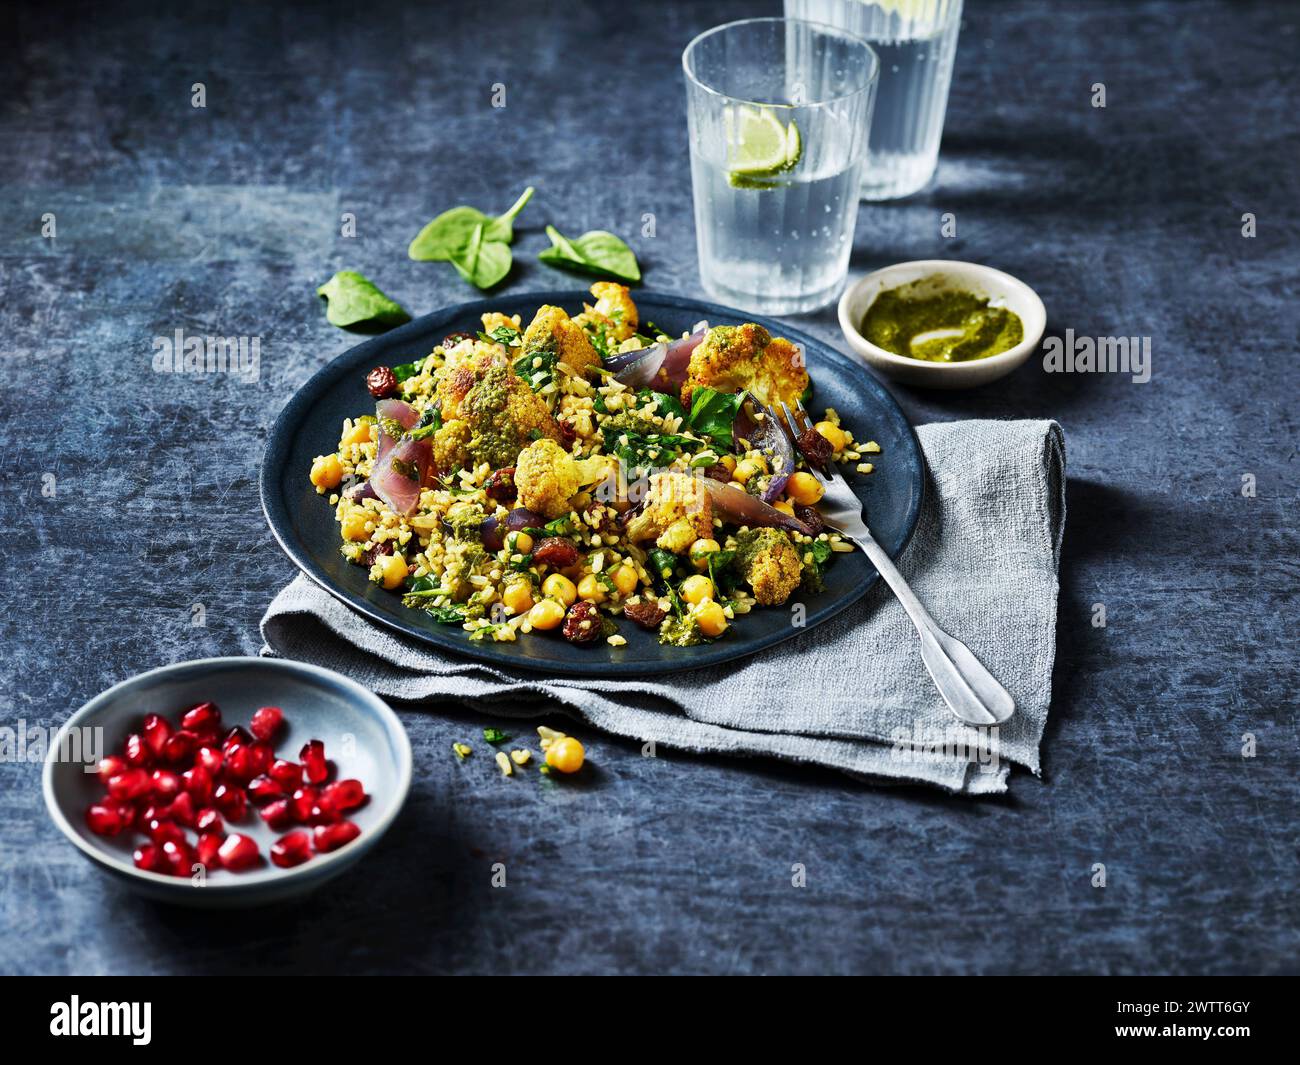 A vibrant plate of mixed grain salad ready to be enjoyed Stock Photo